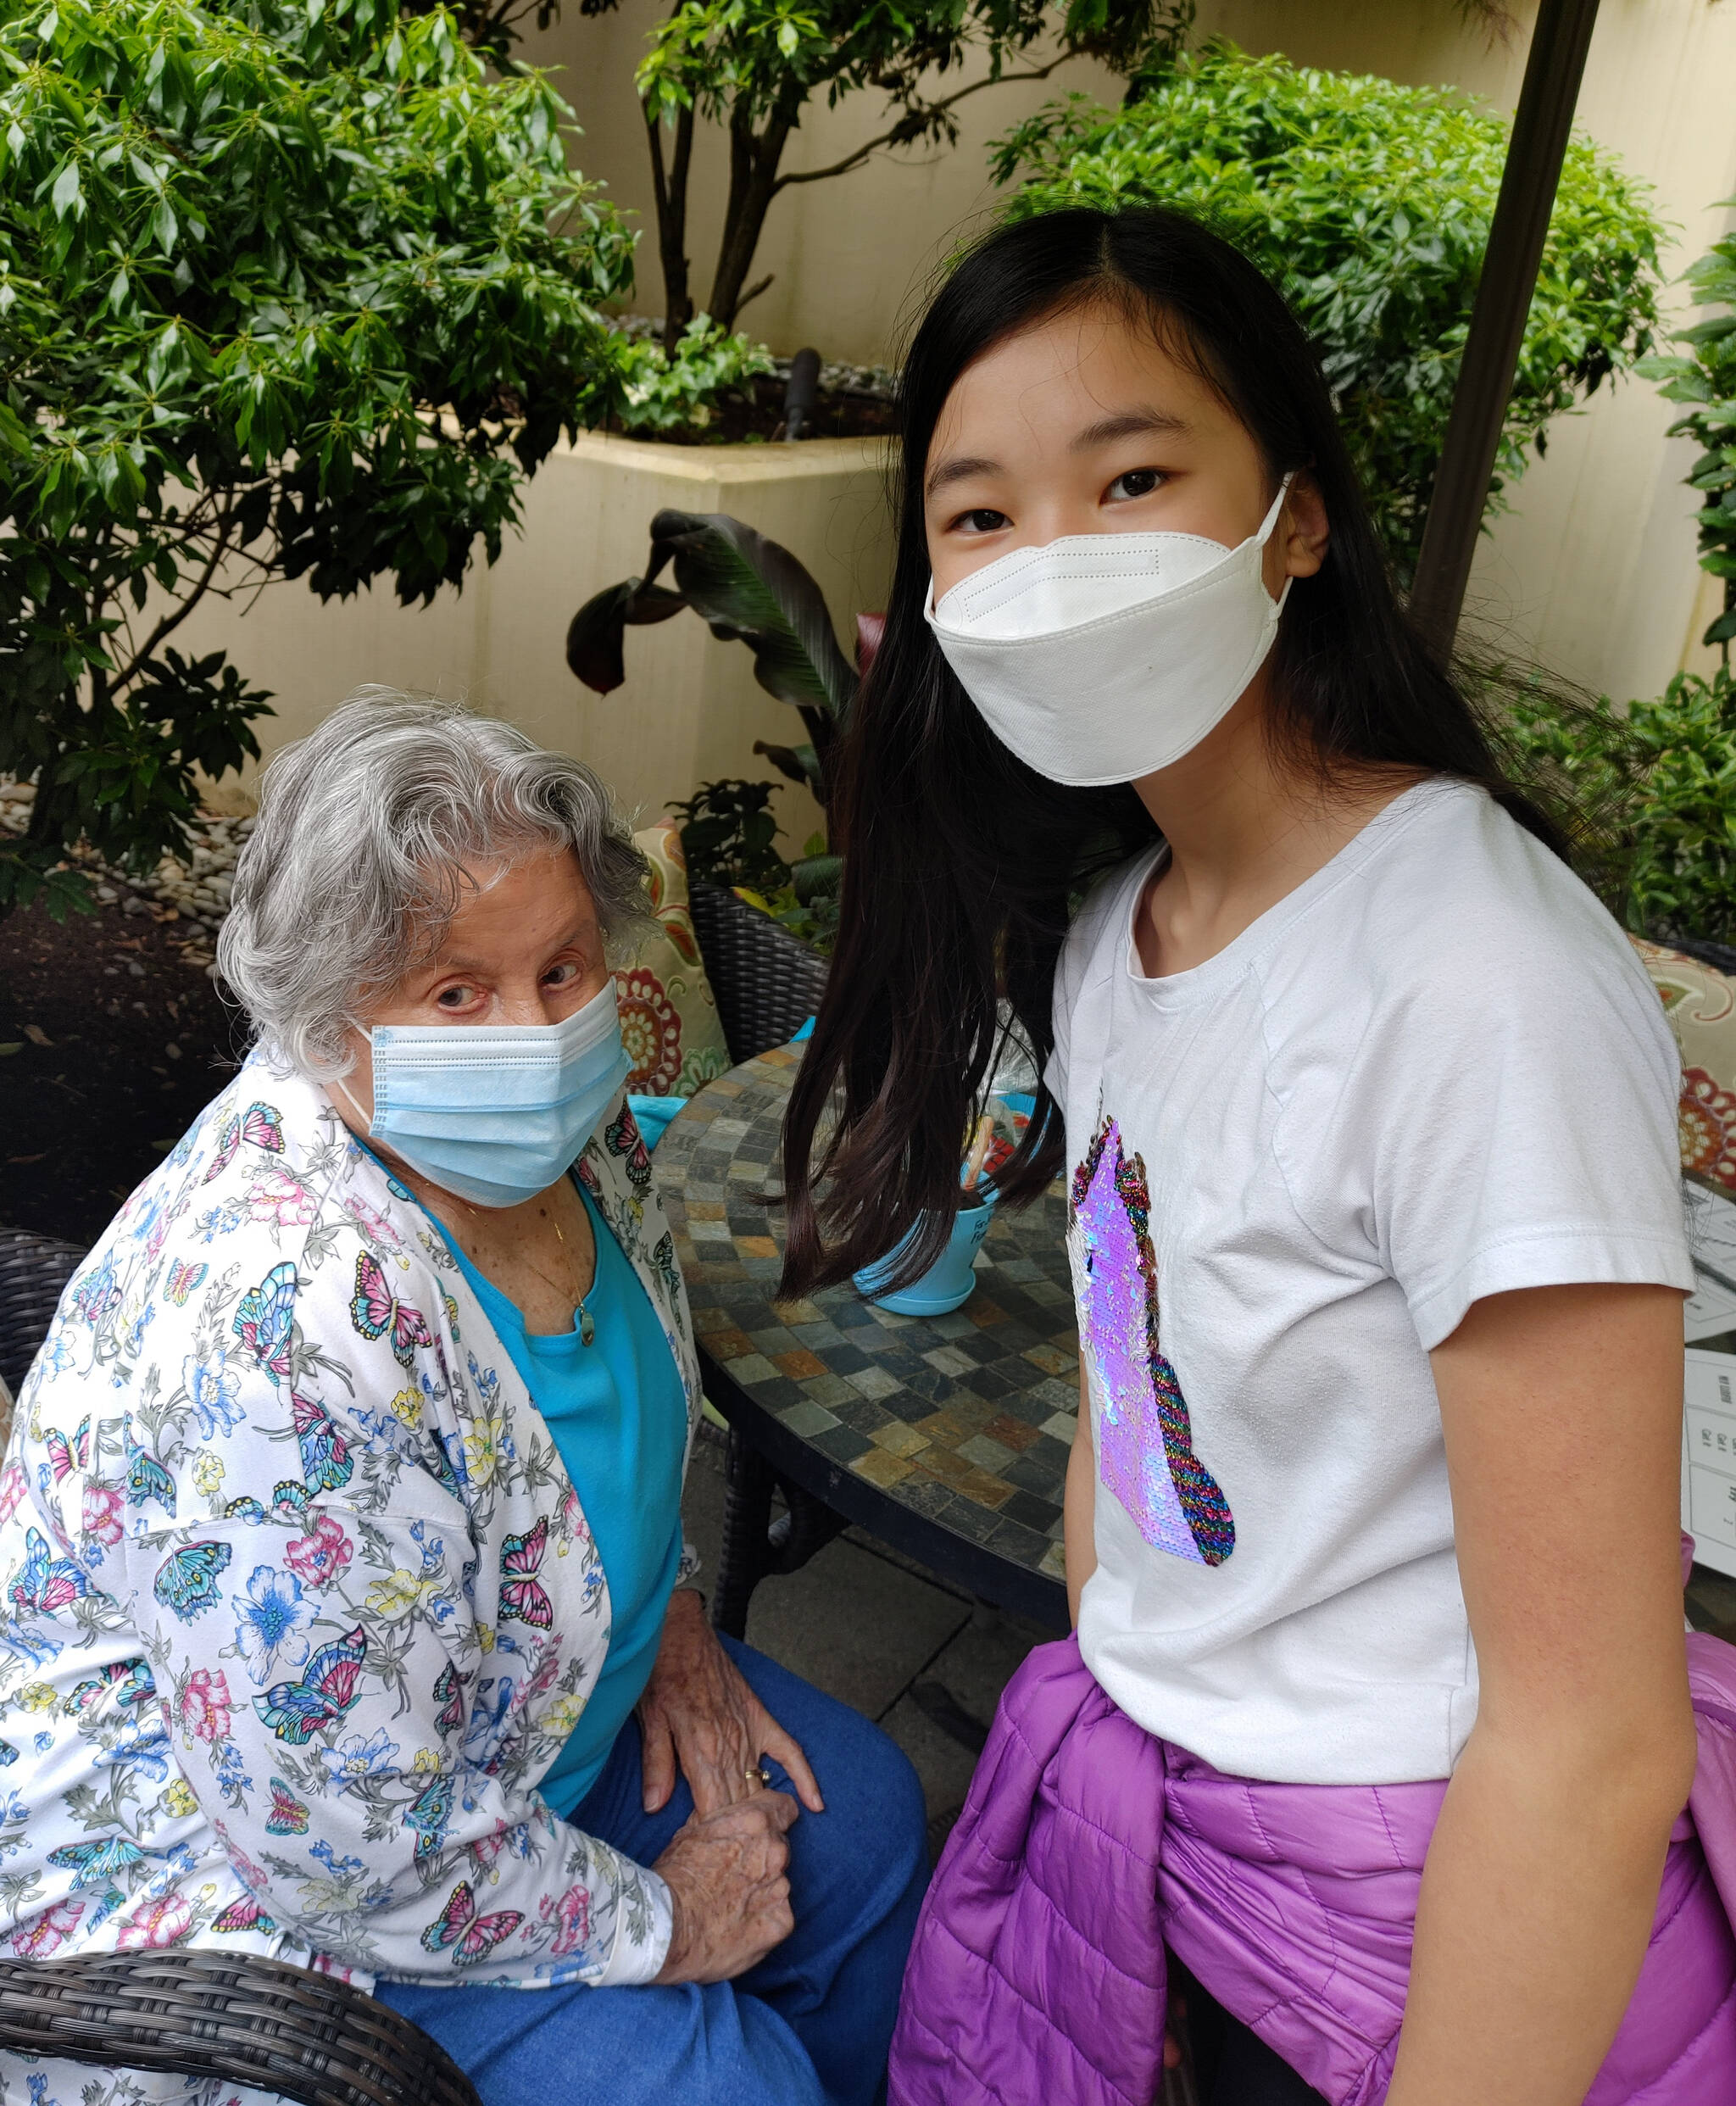 Janie Bianchi, left, and Sabrina Ha met for the first time at the May 24 pen pal party at the Aljoya assisted living community. Andy Nystrom/ staff photo